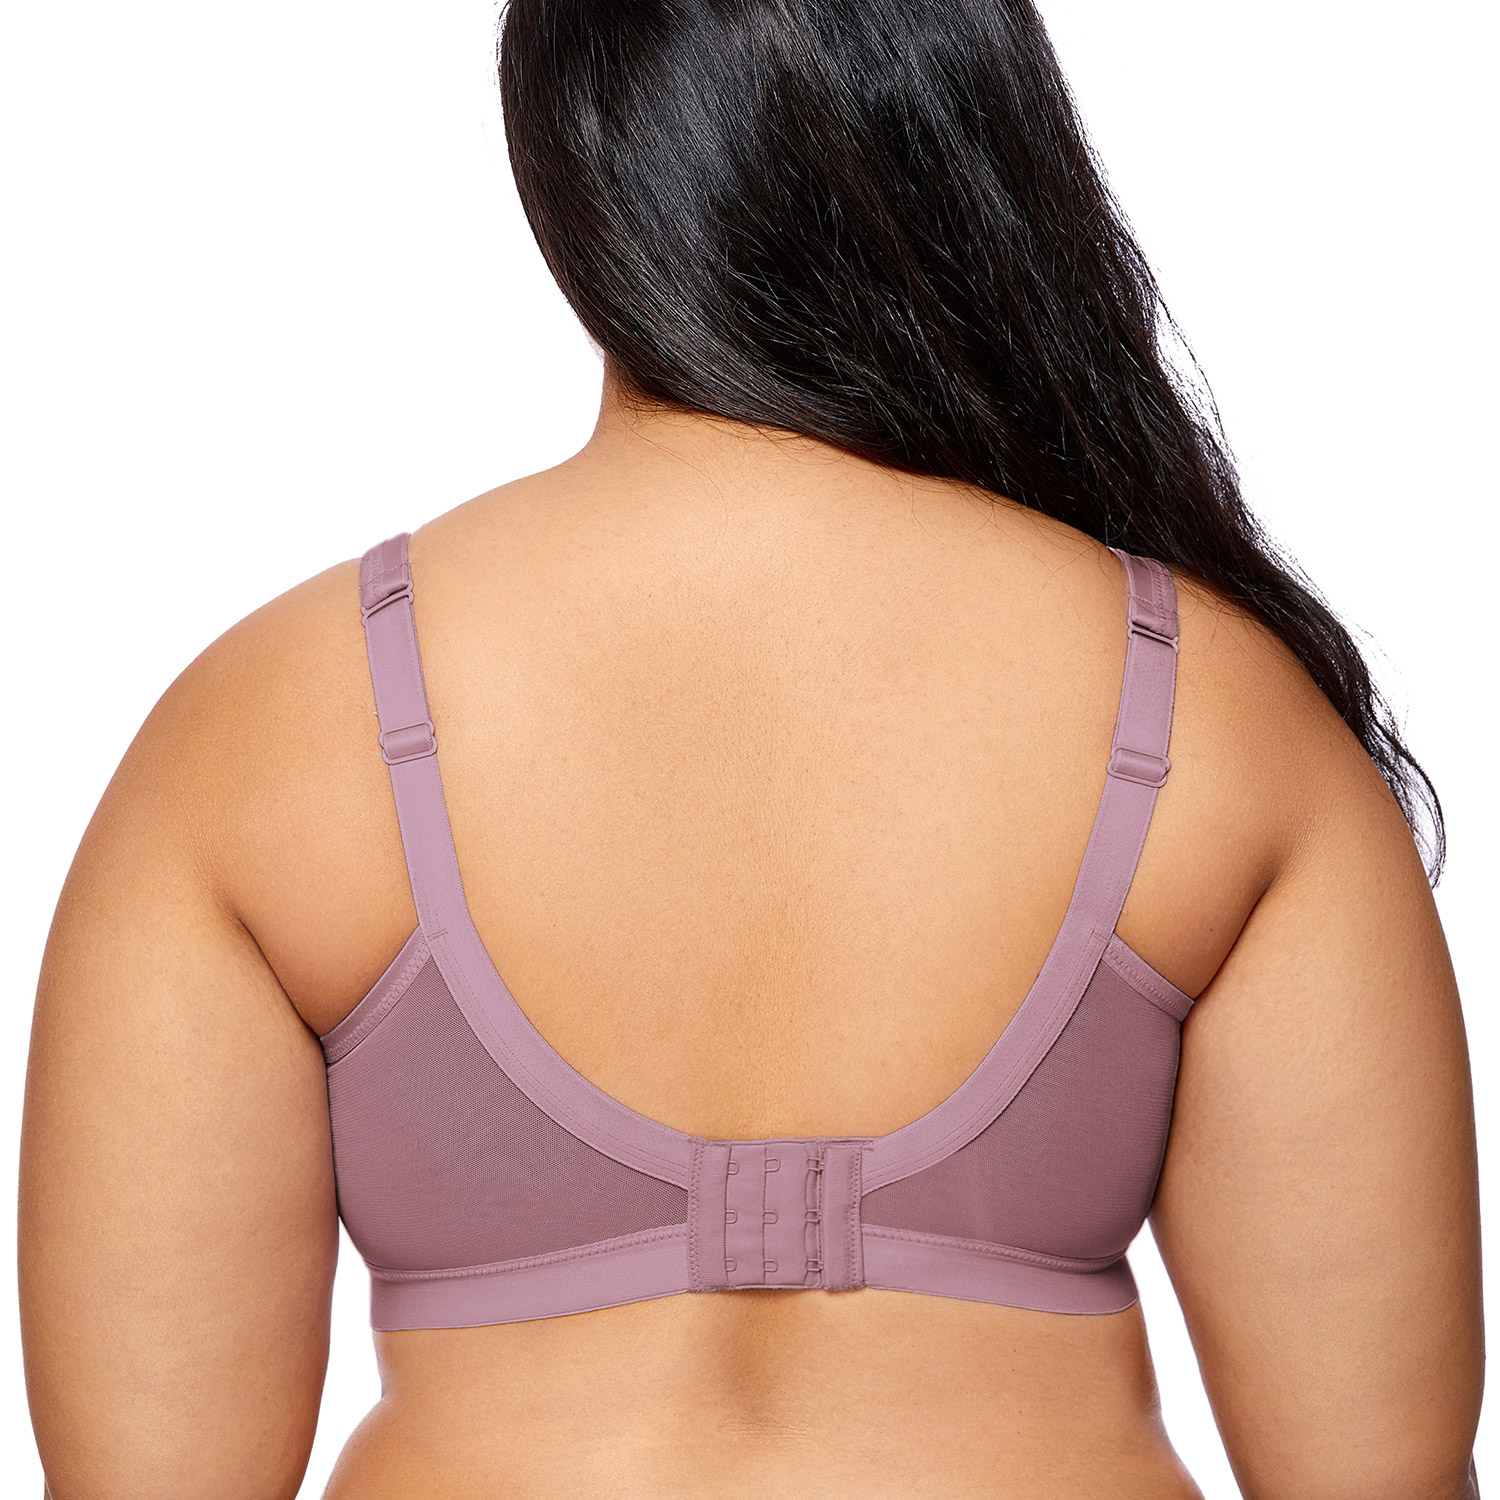 Women's Maternity Bra Plus Size Wirefree Cotton Softcup Supportive | eBay